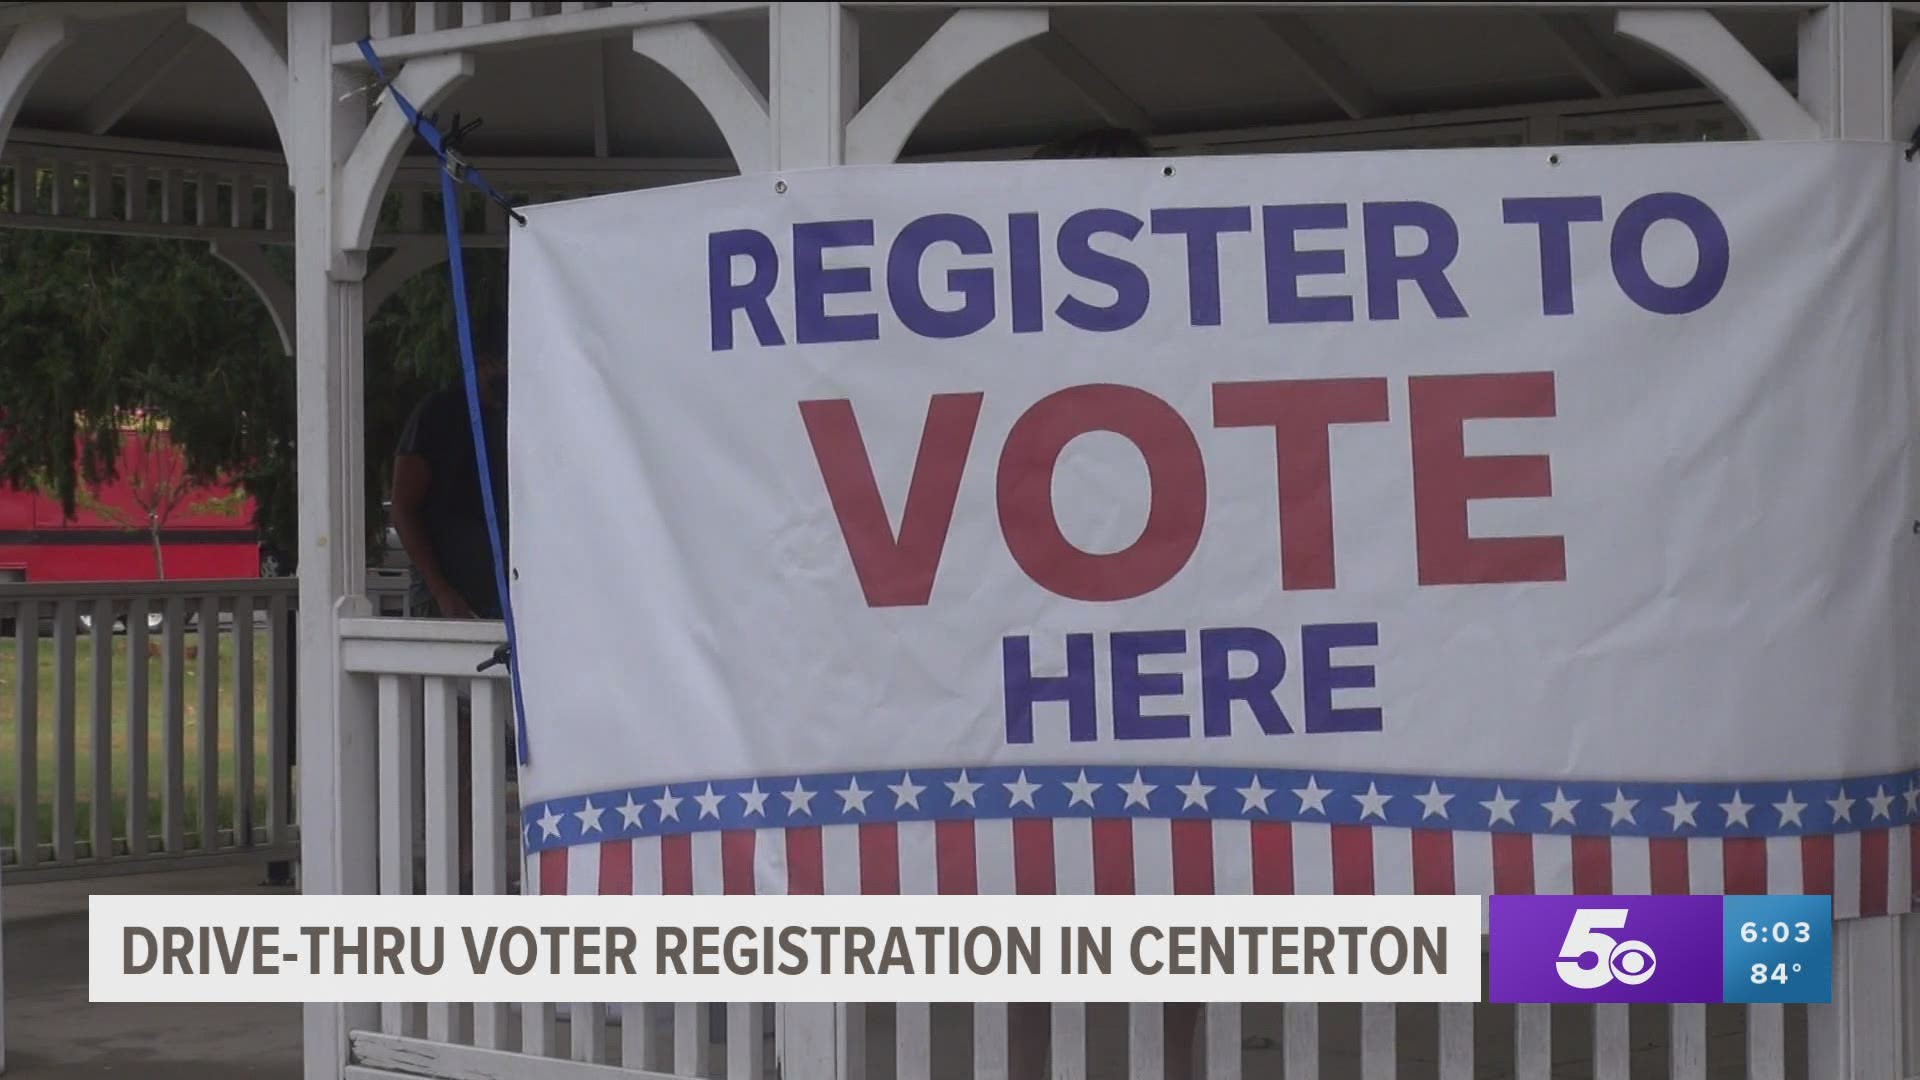 Despite the weather on Saturday morning, dozens of people still came out to register to vote.